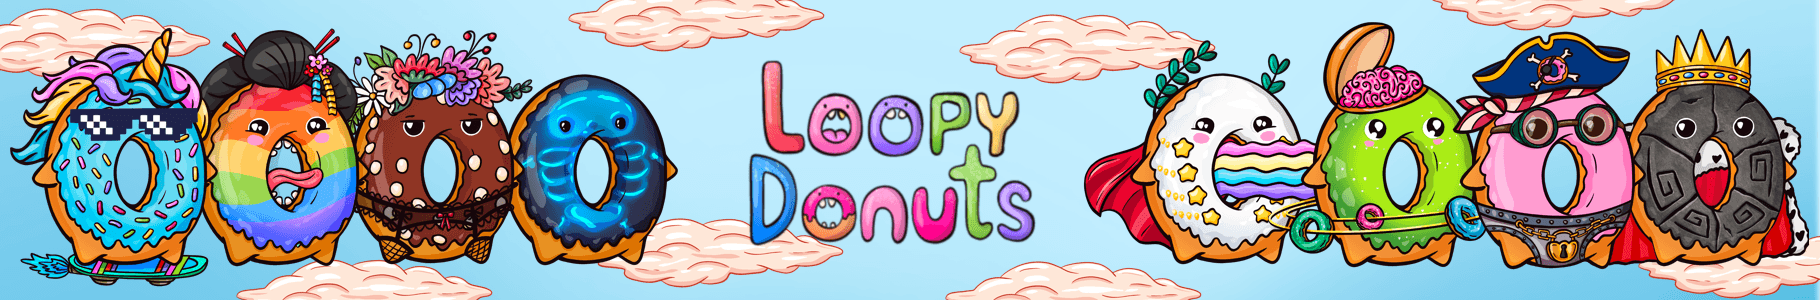 old-loopy-donuts-deployer 横幅